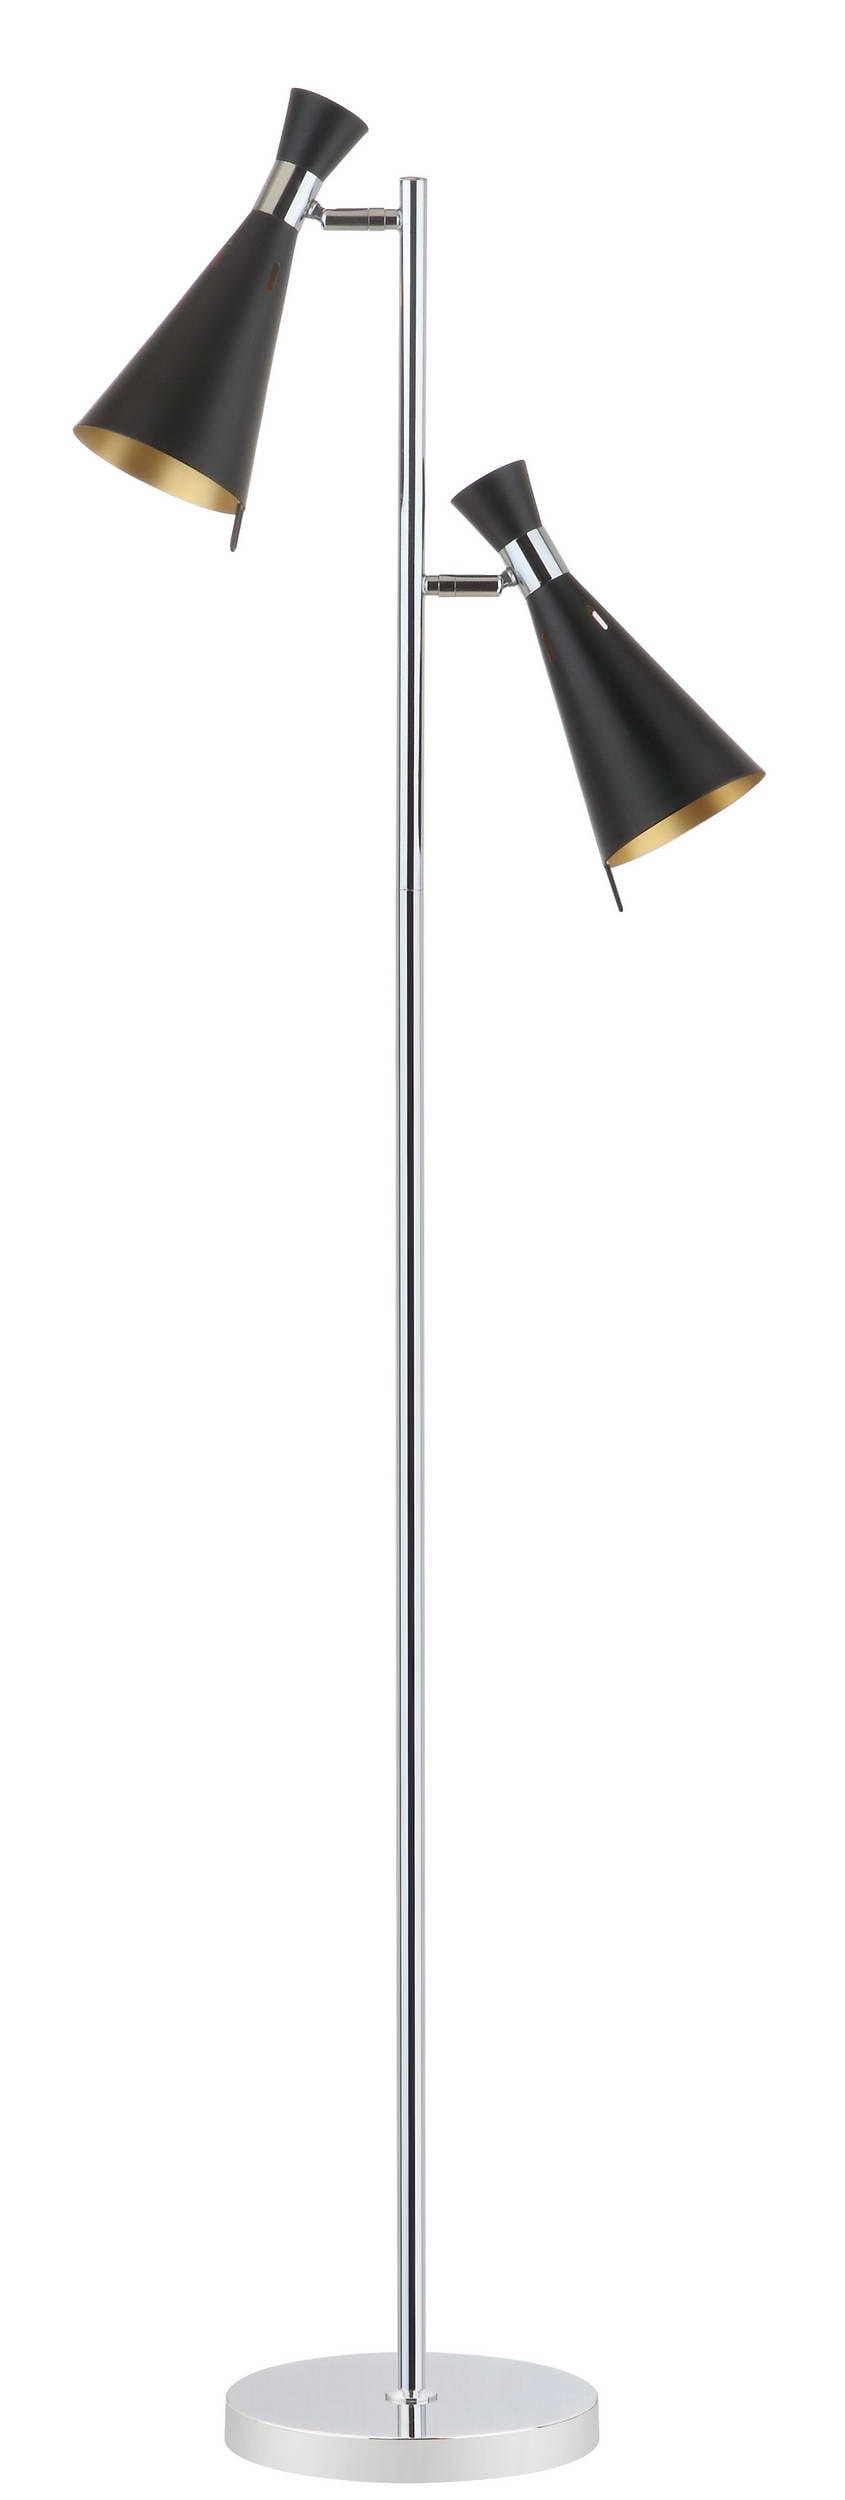 Efisio Adjustable Black and Chrome Floor Lamp with Dual Shades